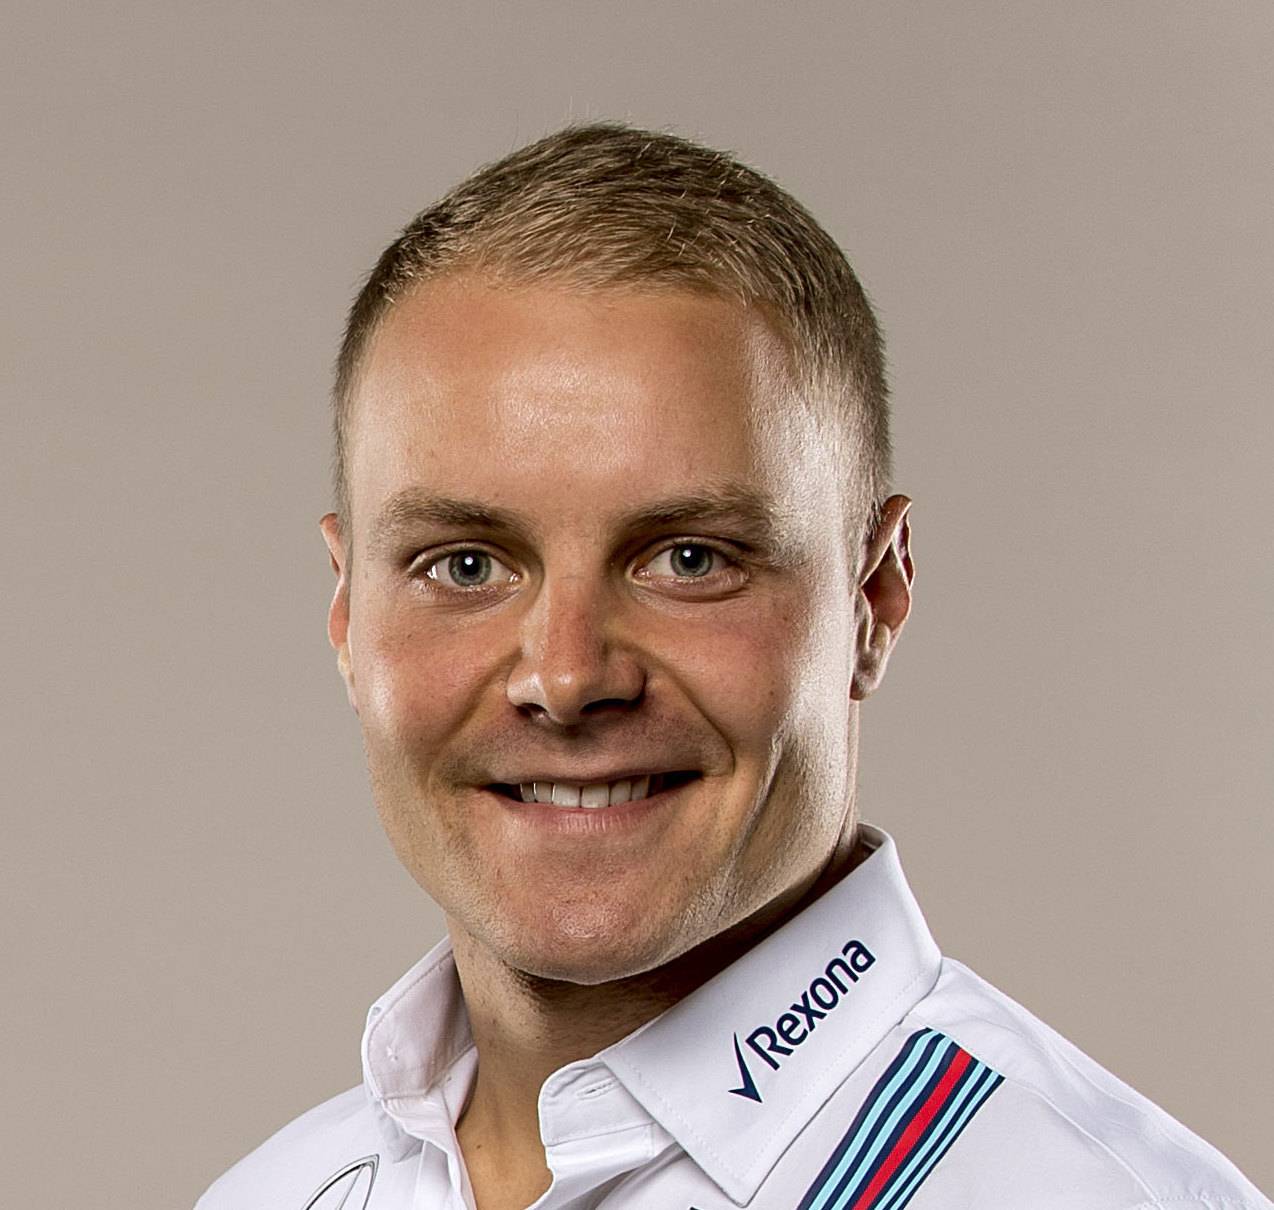 Bottas is gauranteed to win F1 races now - he will be driving an Aldo Costa designed car